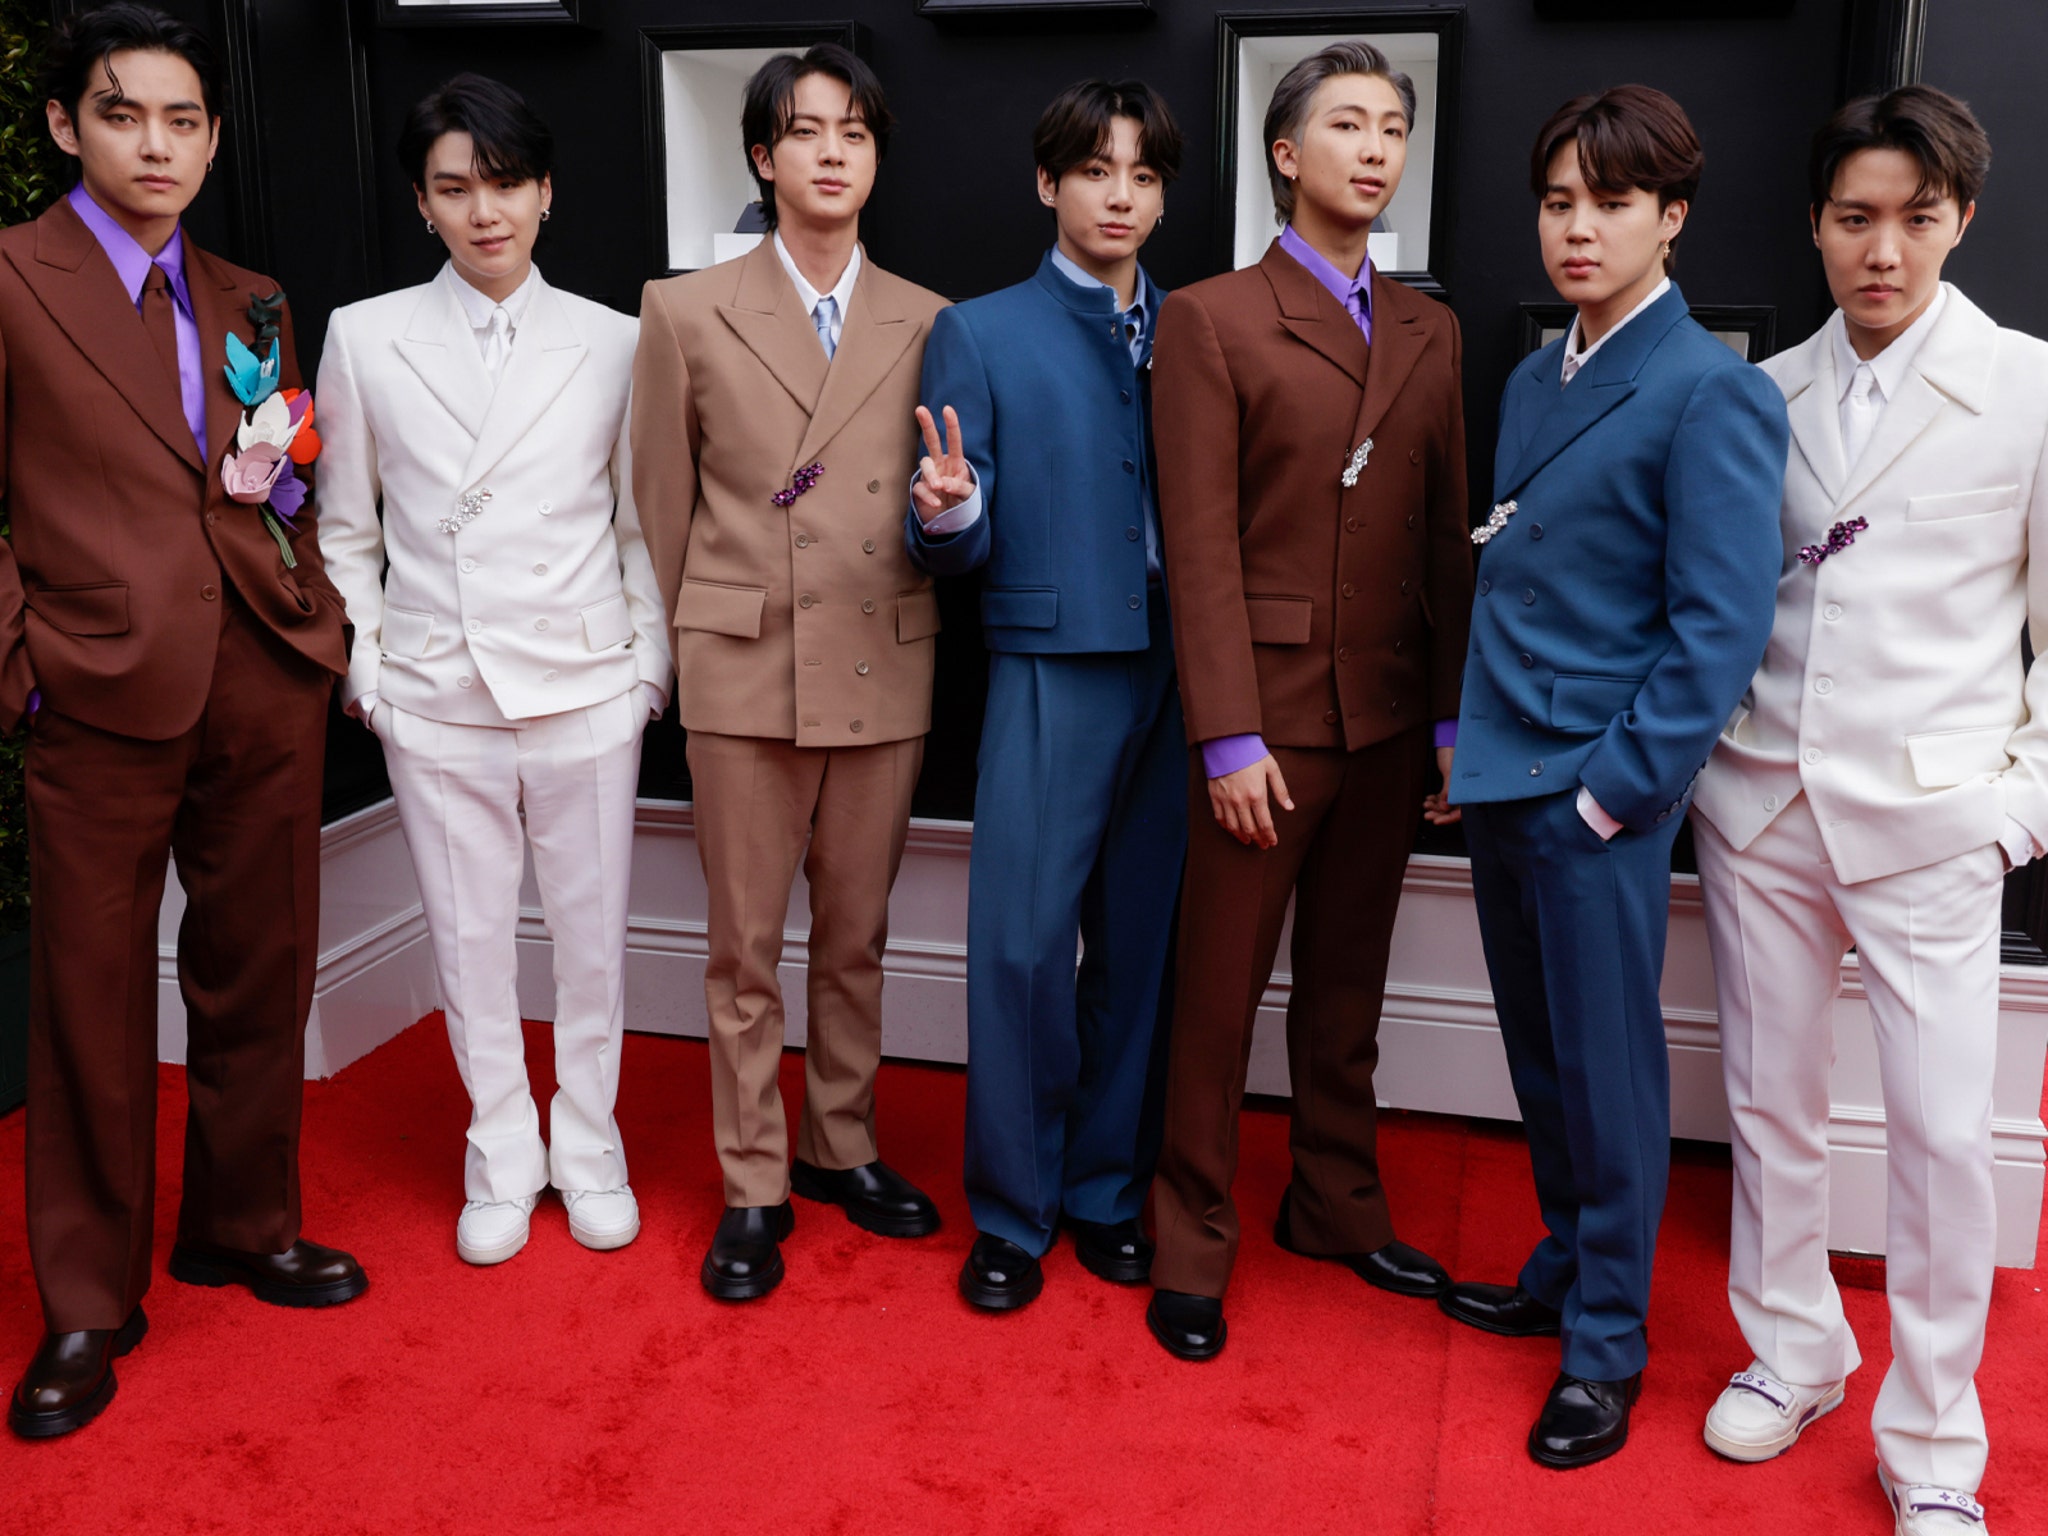 BTS's AMA's 2017 red carpet beauty looks are making history